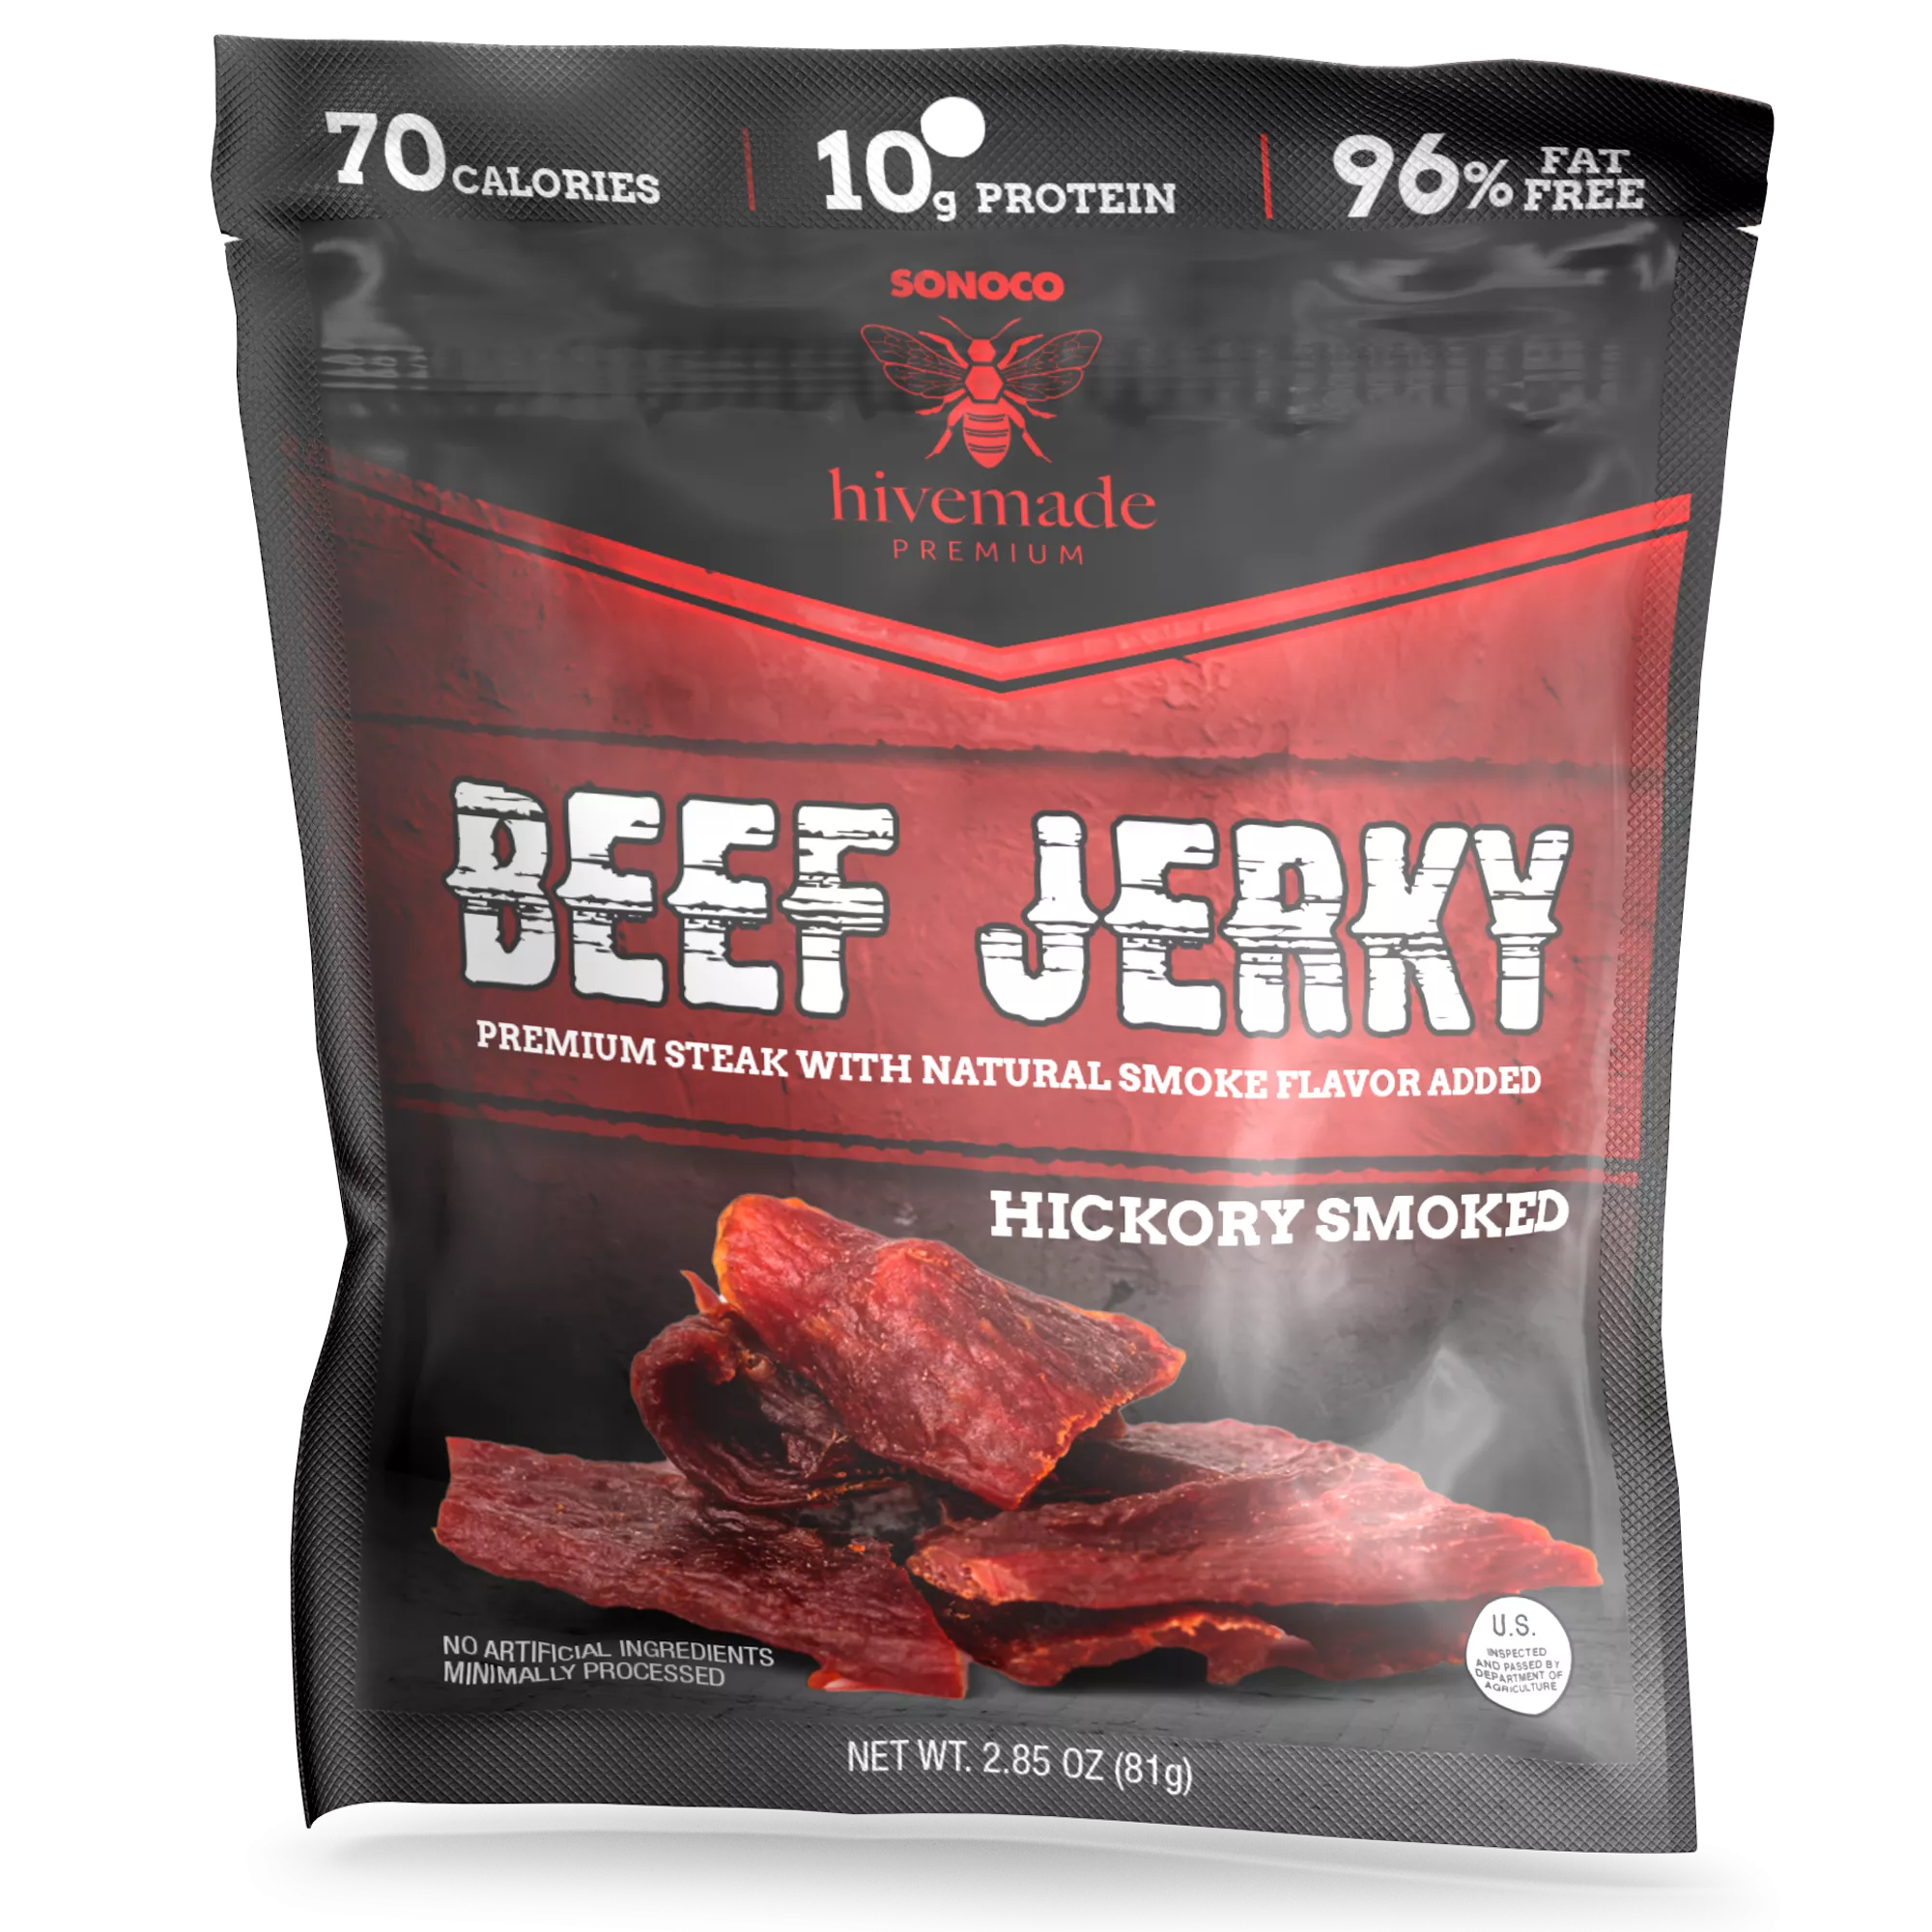 Pouch of beef jerky